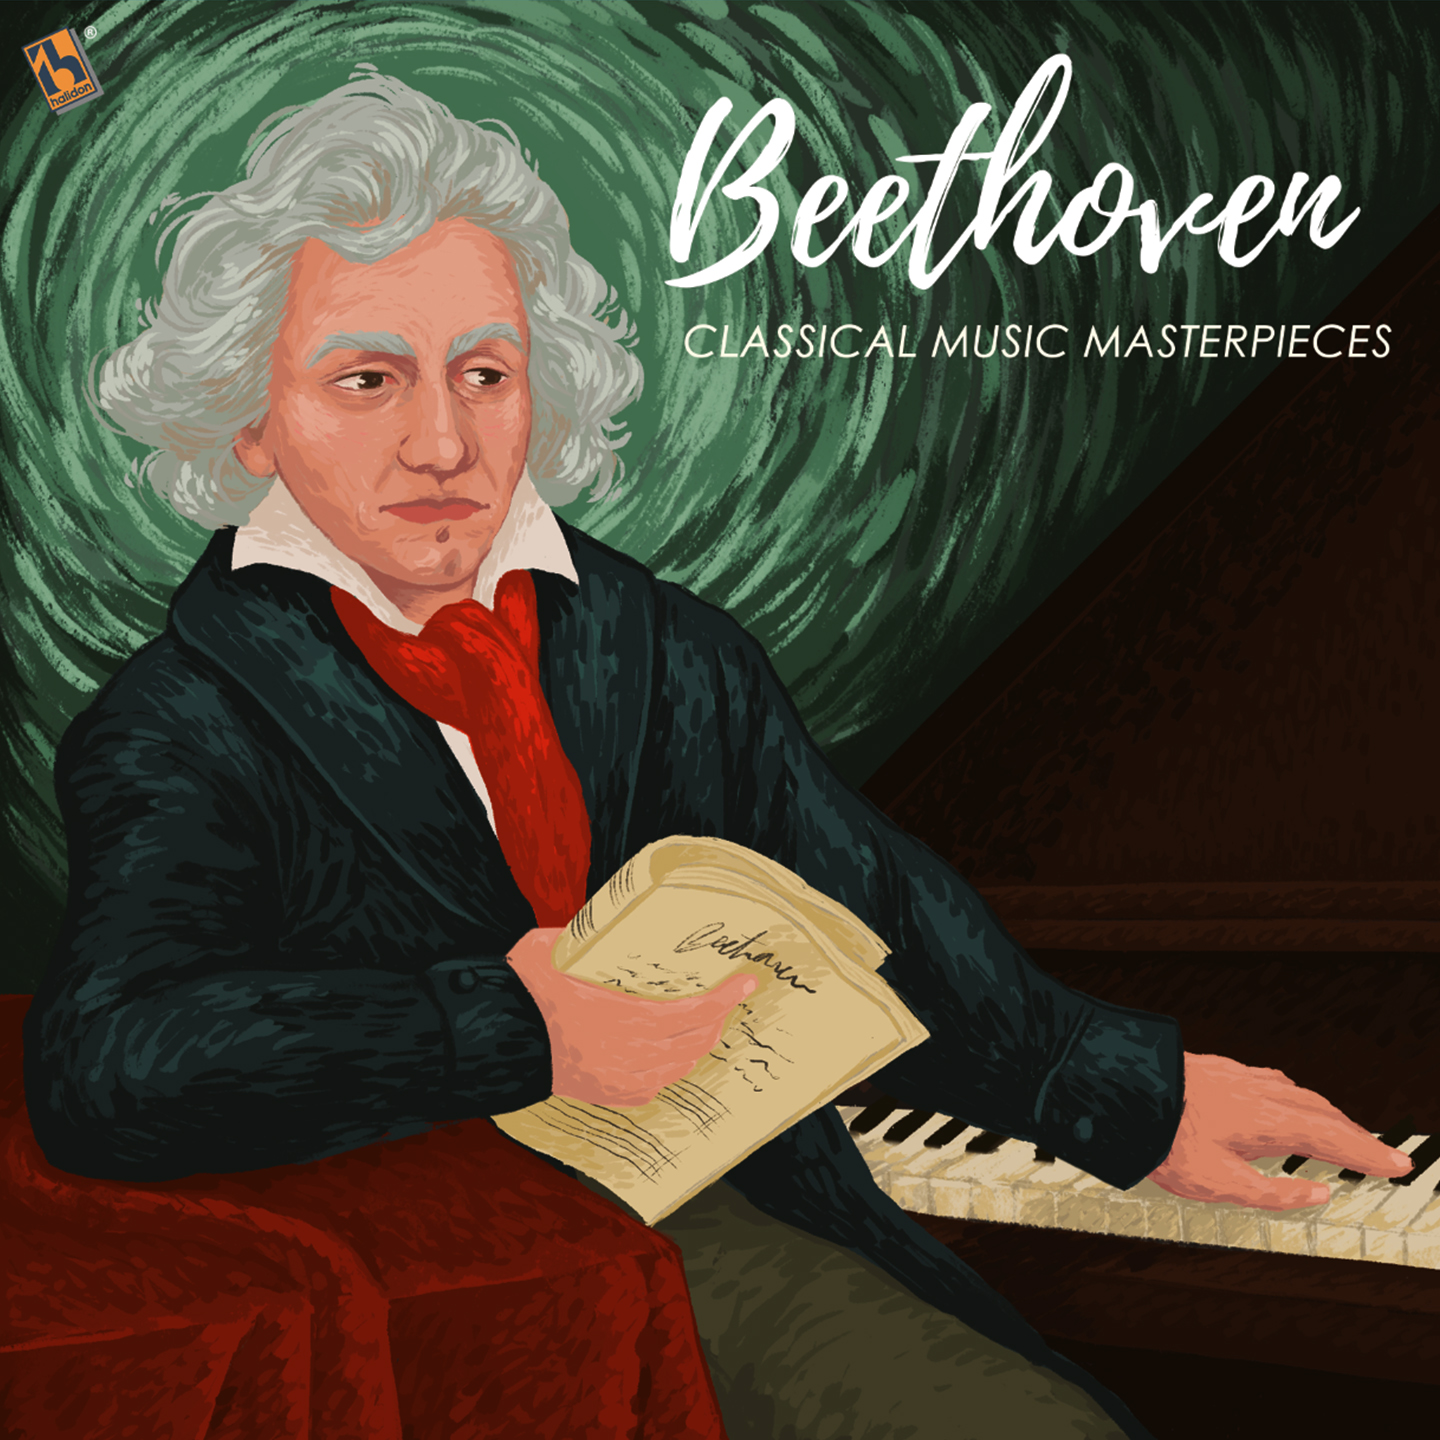 Beethoven - Classical Music Masterpieces